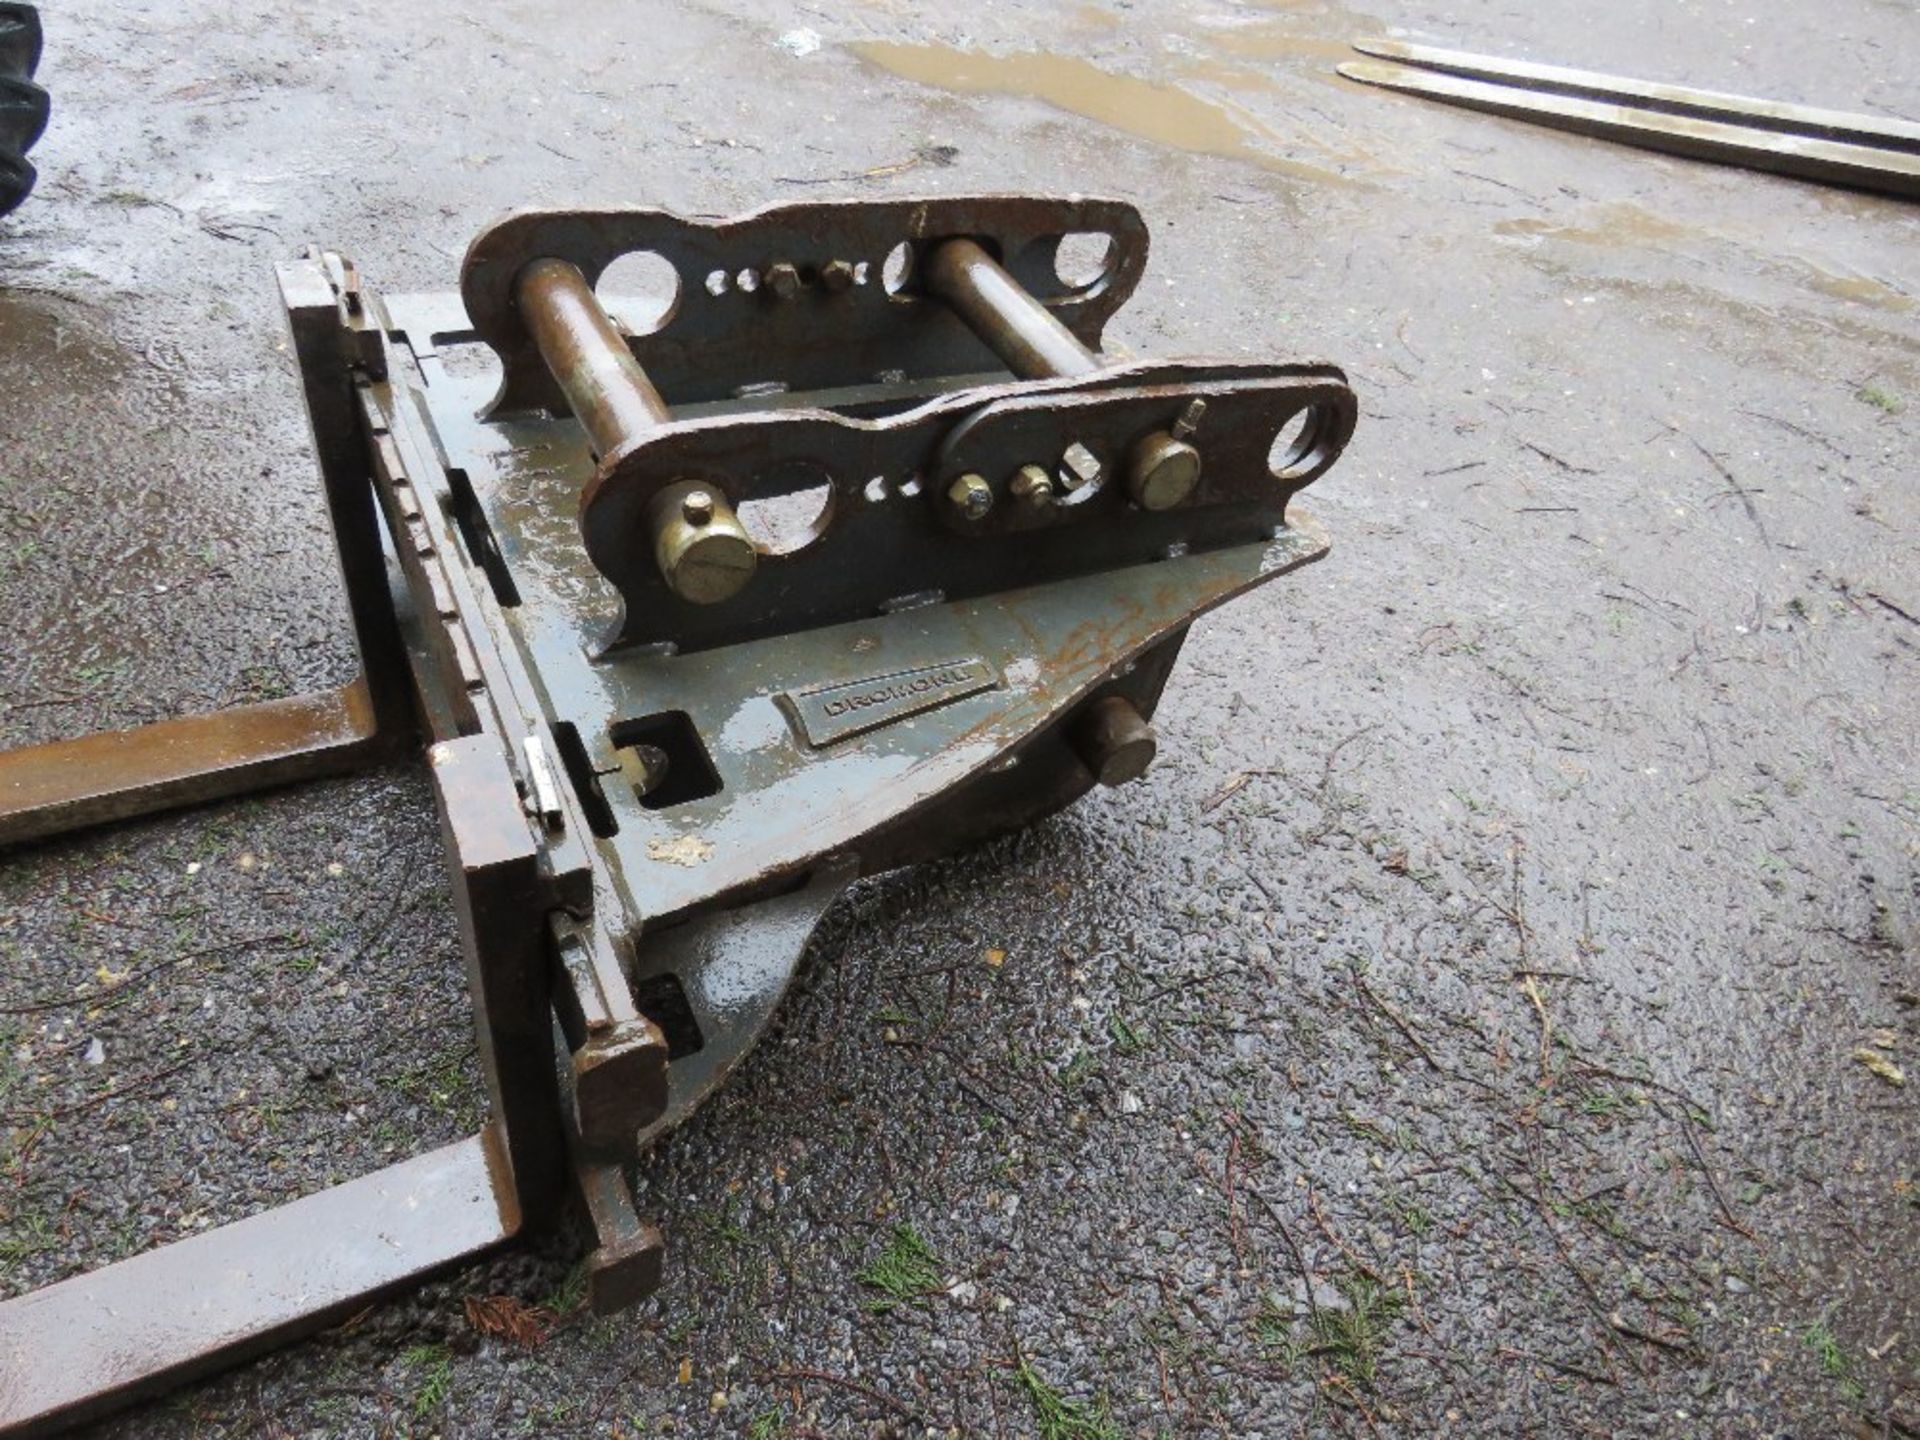 SET OF DROMORE PALLET FORKS FOR 13 TONNE EXCAVATOR, 65MM PINS, DIRECT EX LOCAL COMPANY, UNTESTED - Image 3 of 5